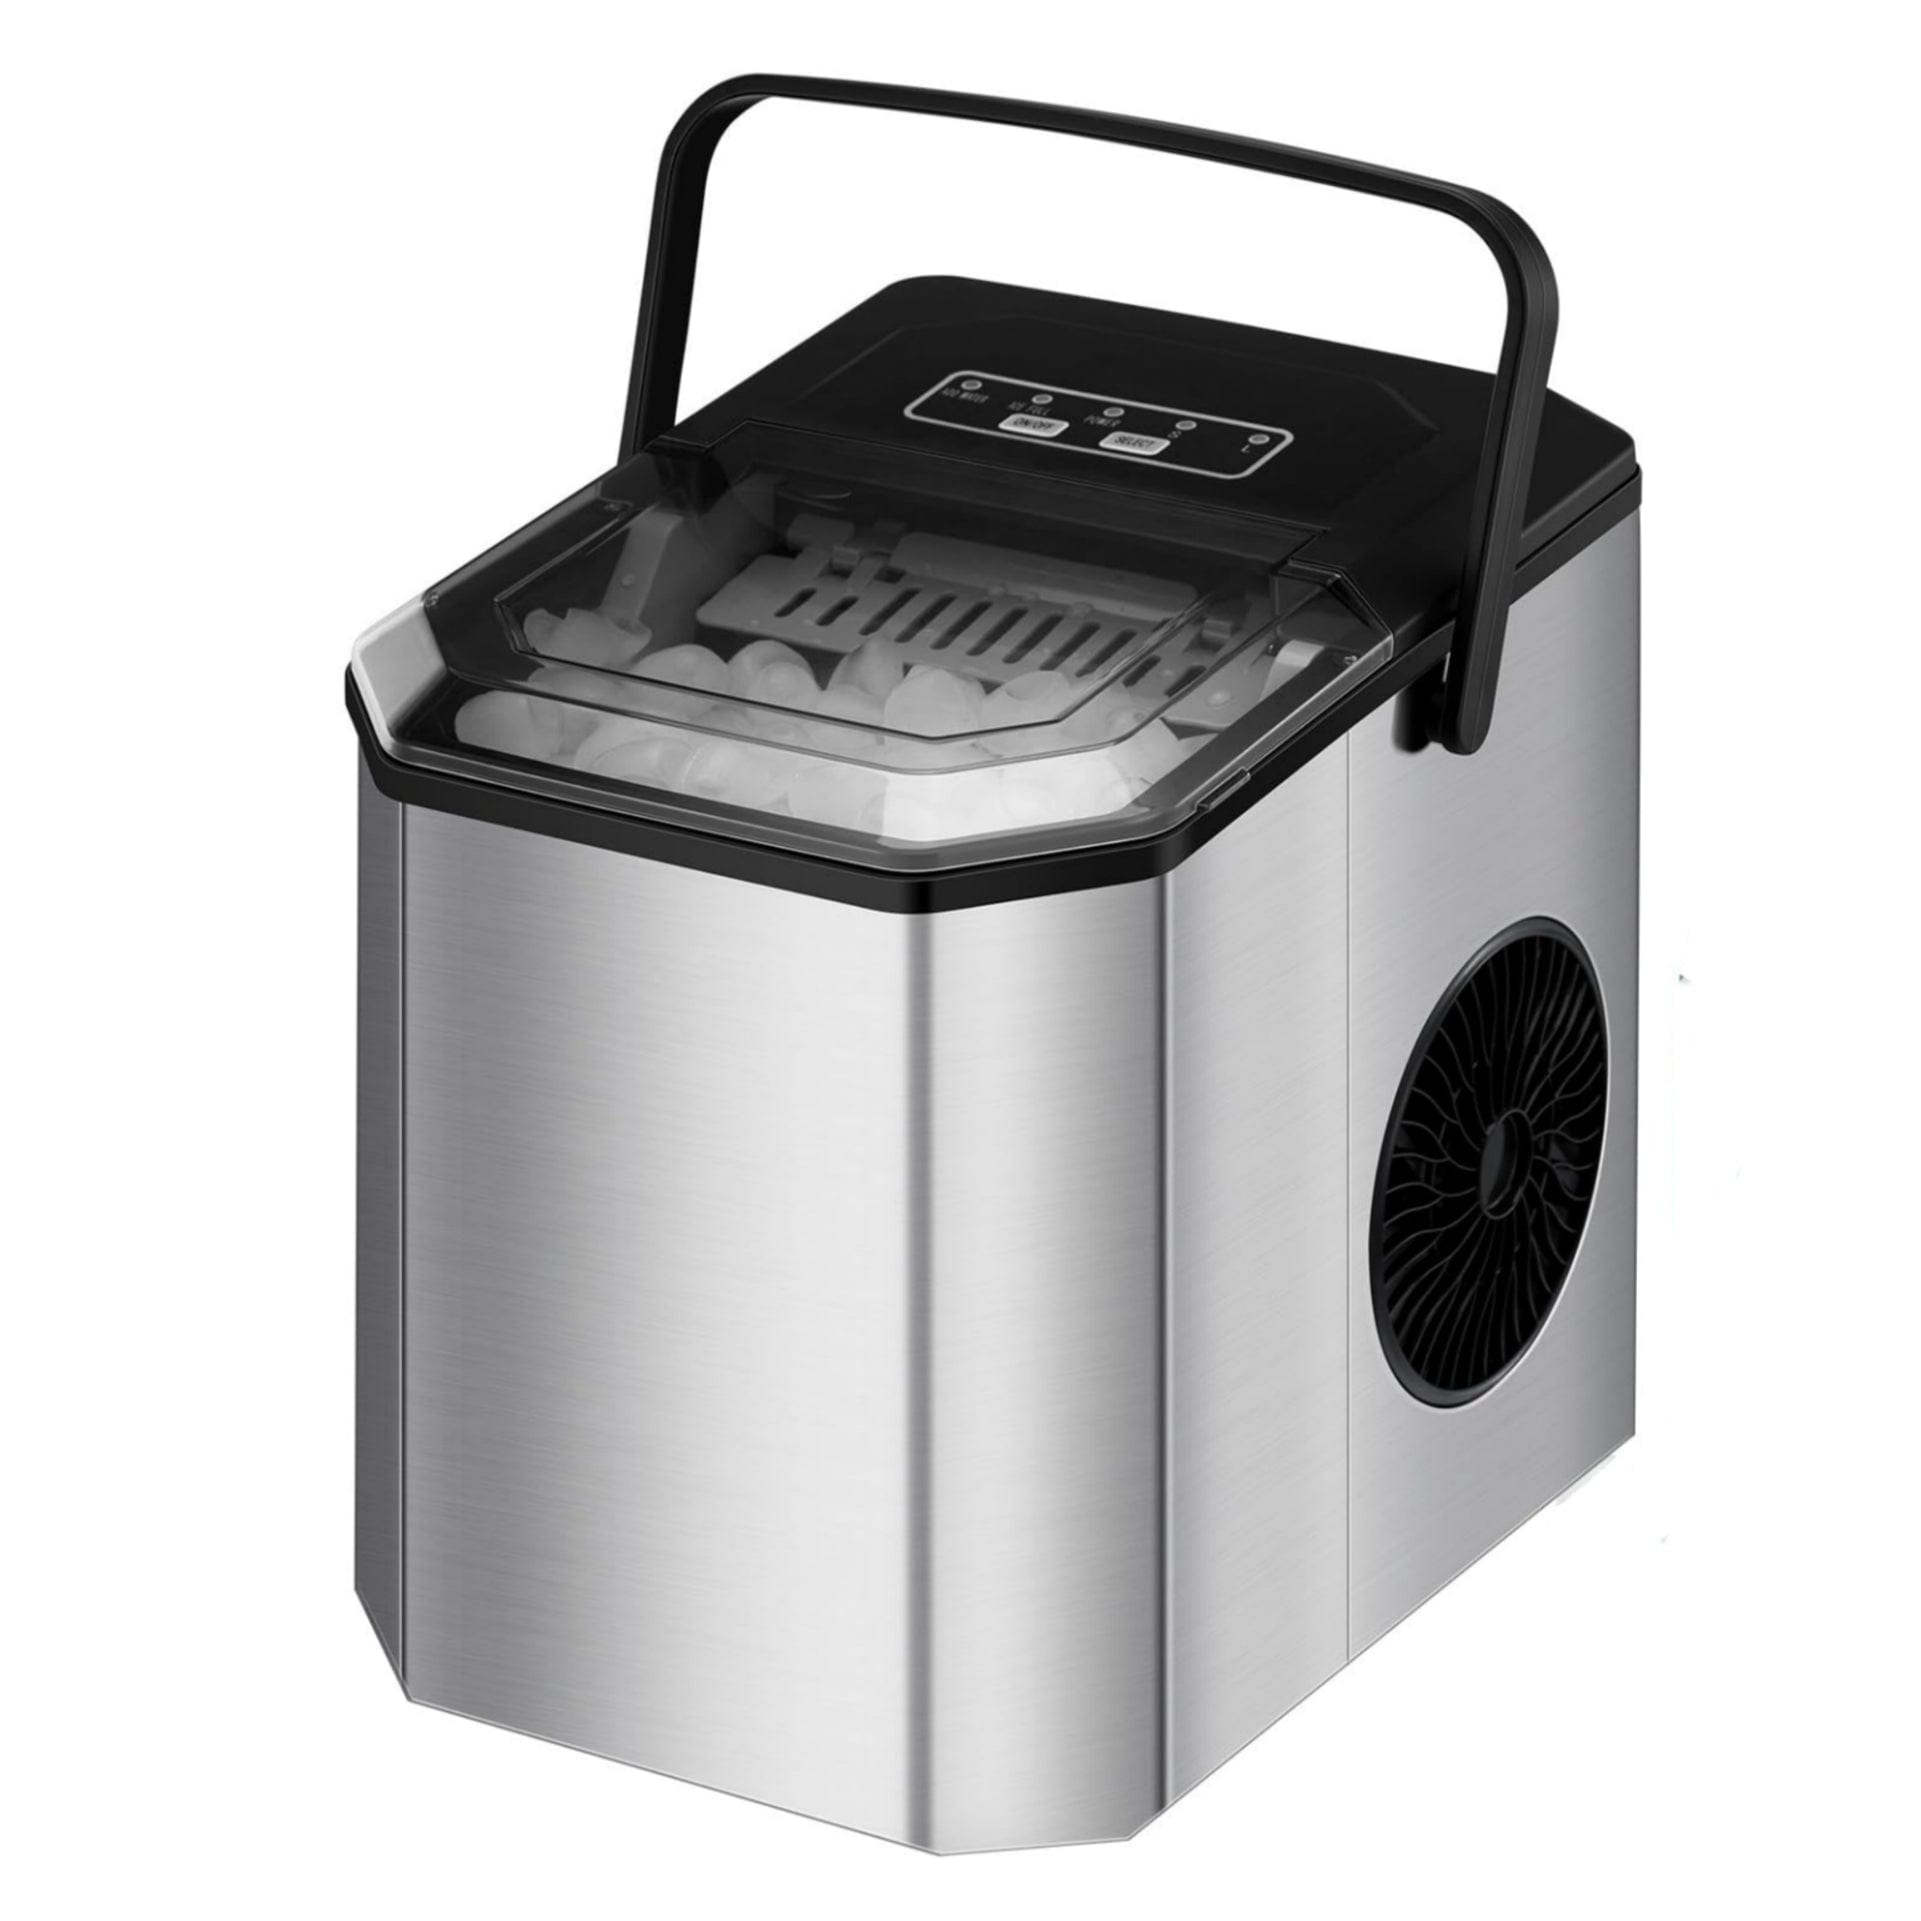 Portable Ice Maker Countertop 26 LBS in 24 Hours, with Ice Scoop & Bas